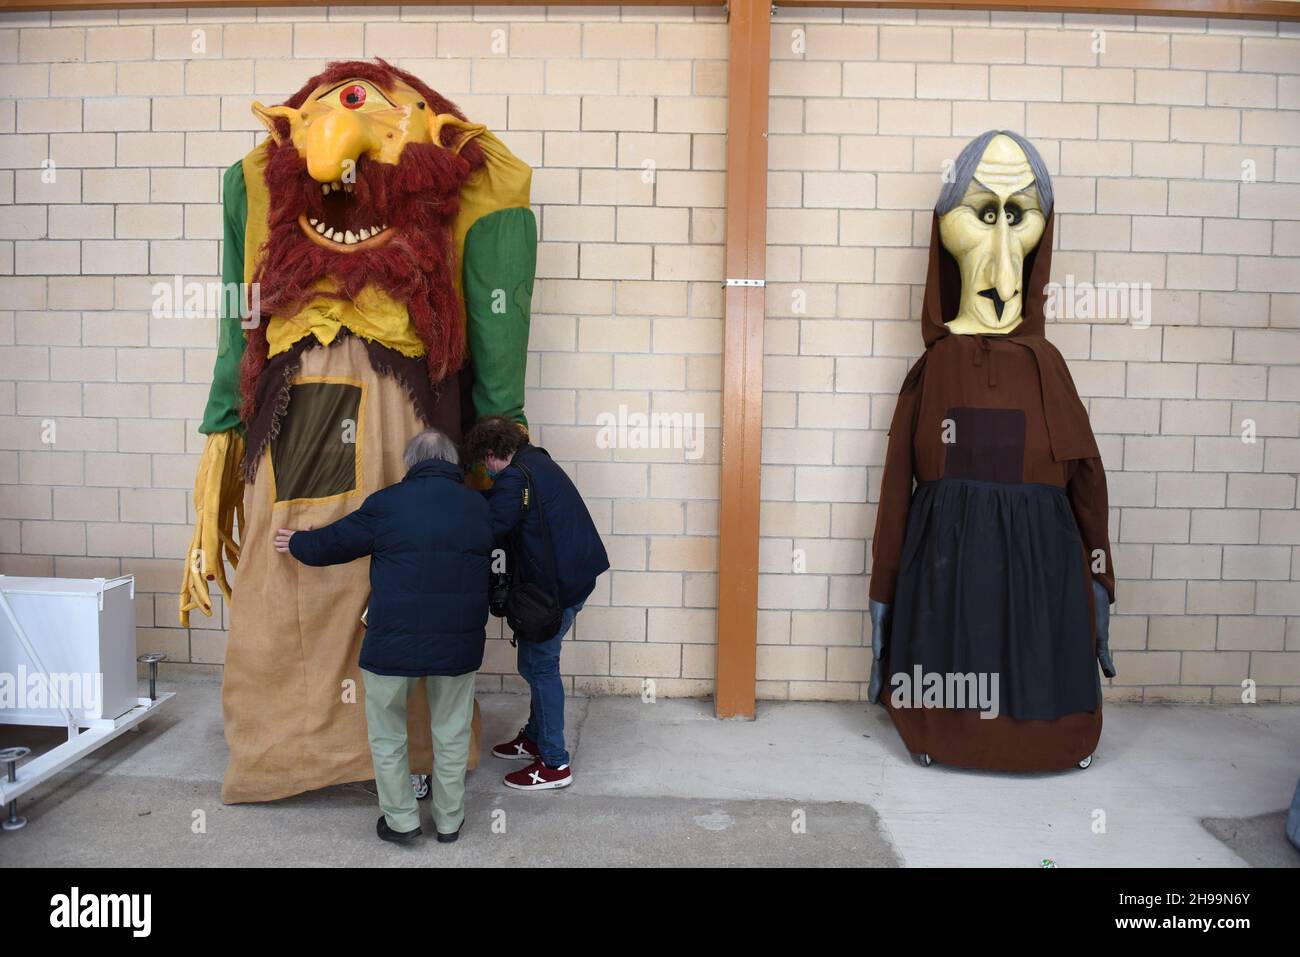 Spain. 05th Dec, 2021. Participants prepare a Gigante (Giant) for the Giants and Big Heads celebration.This Sunday, the village of Golmayo, north of Spain celebrates the National of Gigantes and Cabezudos (Giants and Big Heads) Festival. Gigantes and Cabezudos were created to represent archetypes and the tradition of the Spanish region. They are dressed in typical regional wedding and fiesta costumes. (Photo by Jorge Sanz/SOPA Images/Sipa USA) Credit: Sipa USA/Alamy Live News Stock Photo